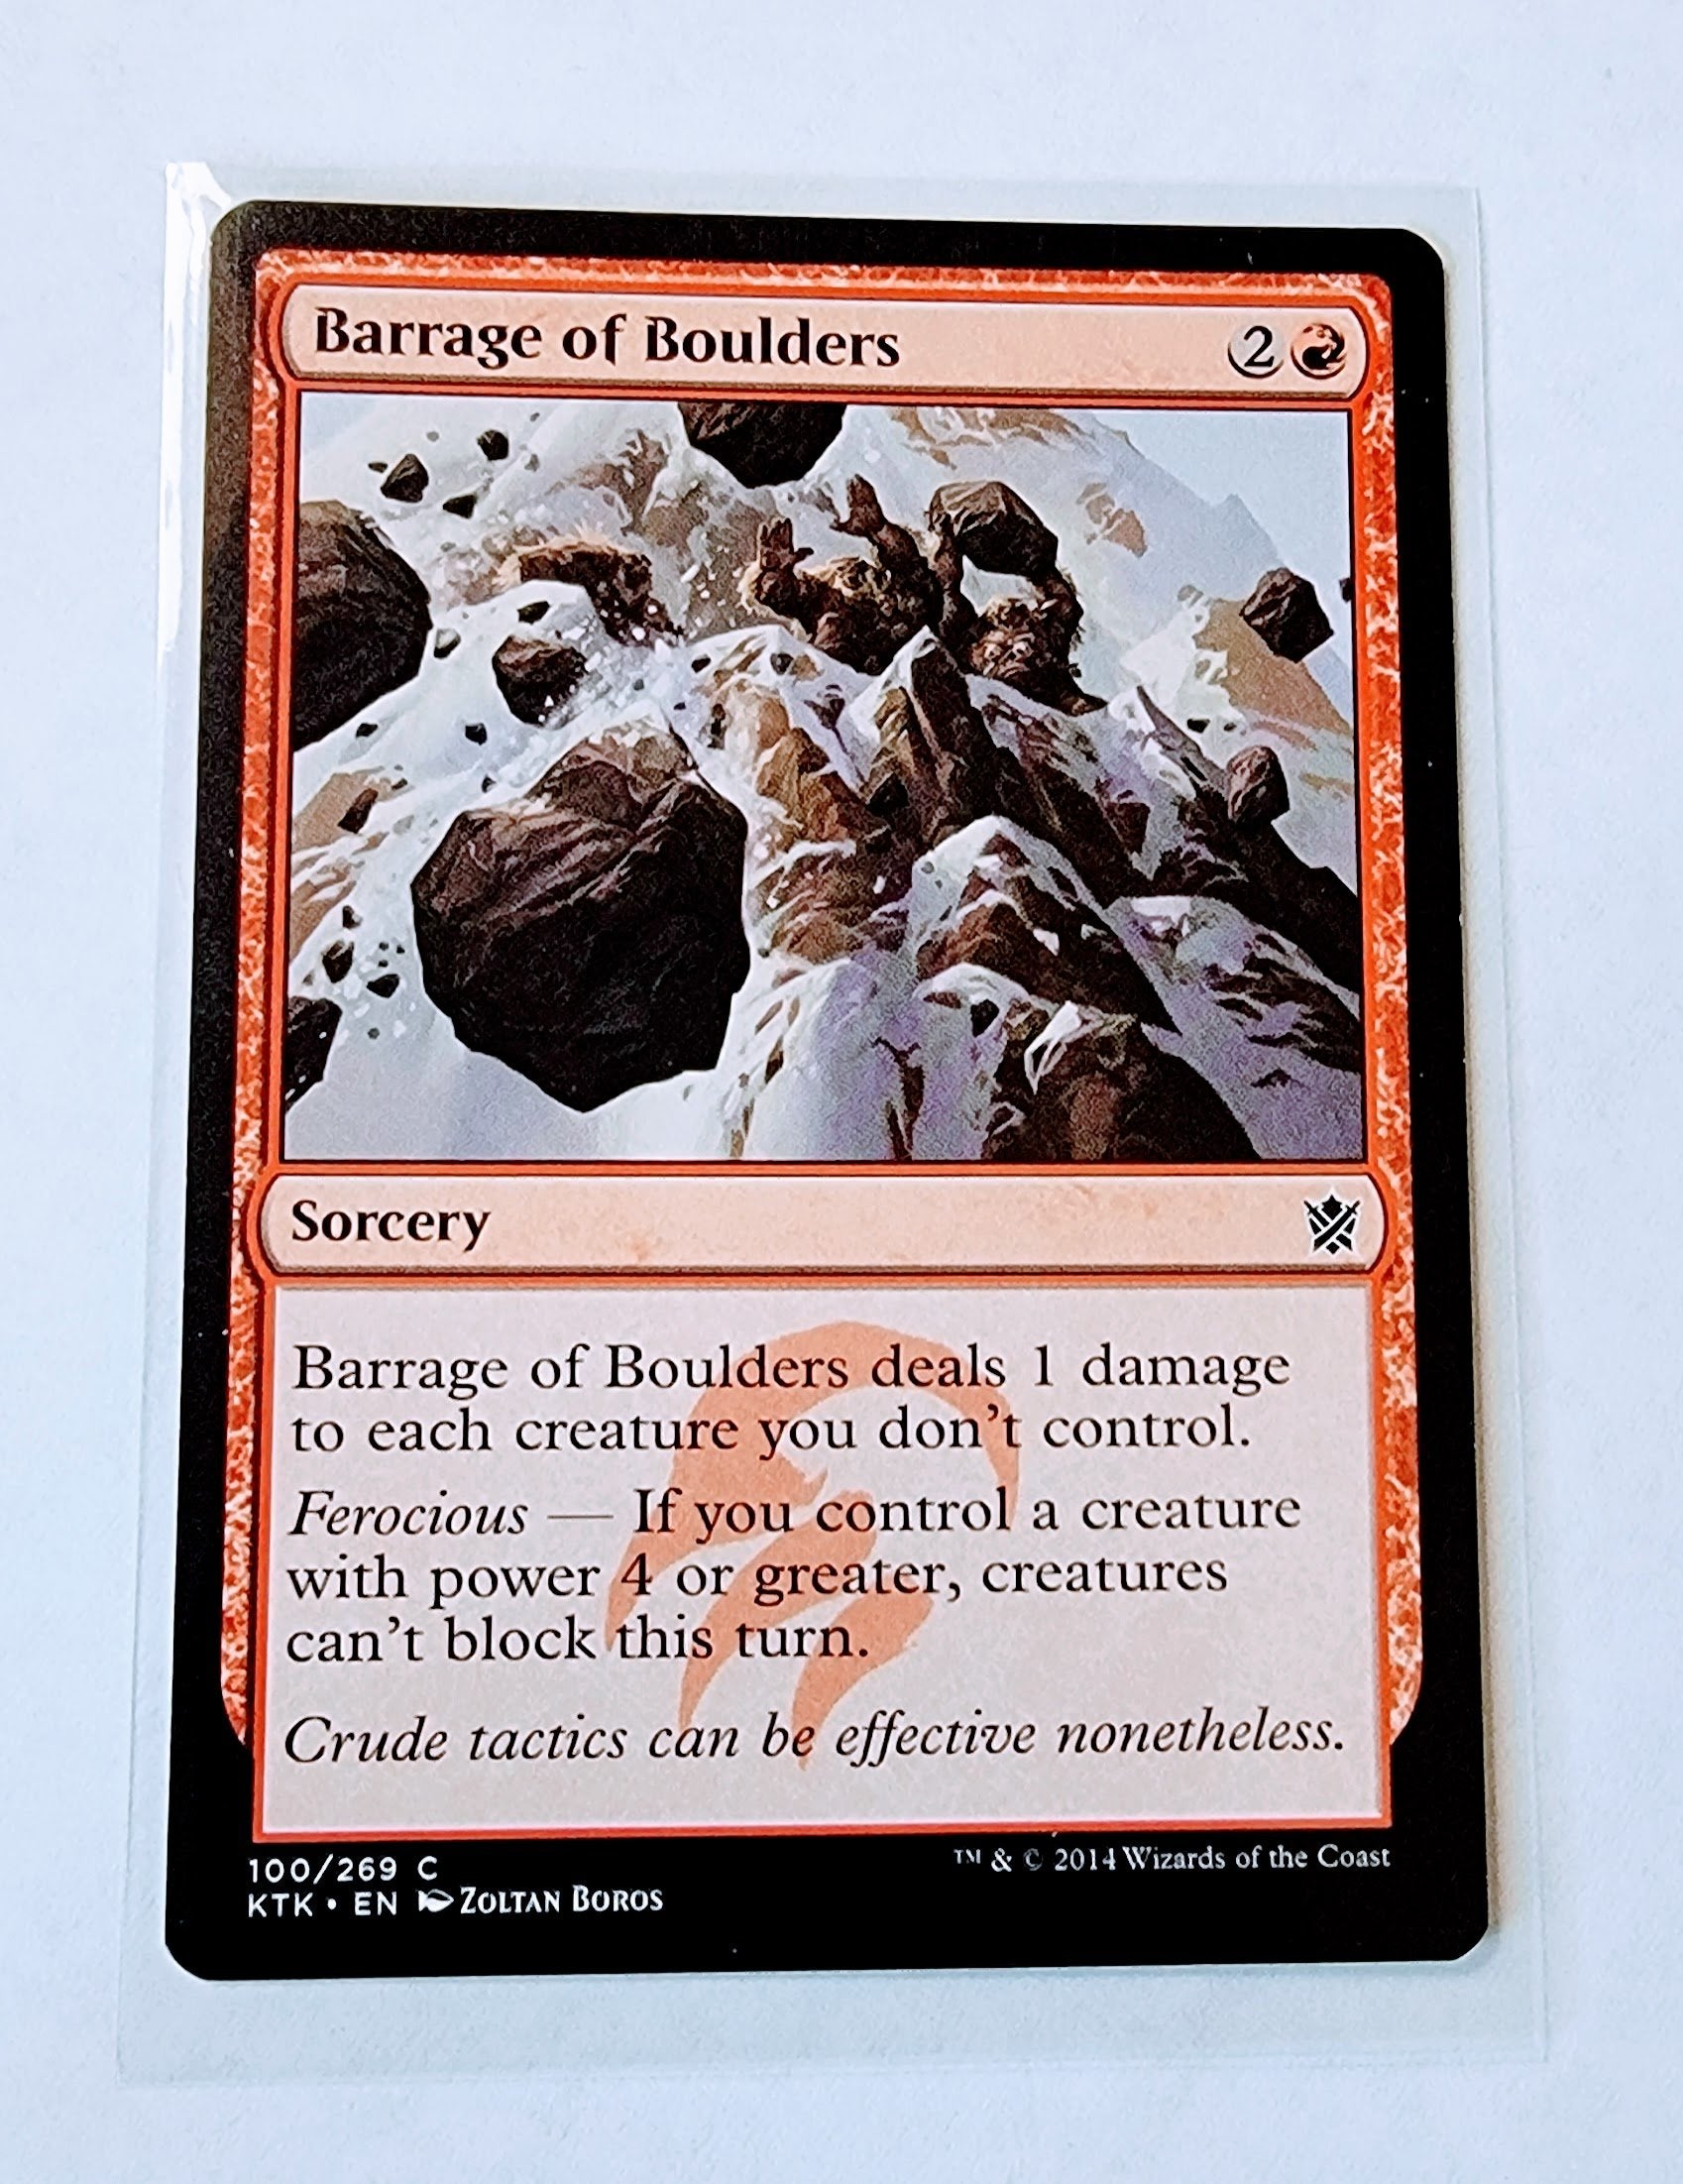 2014 Wizards of the Coast Magic: The Gathering - Barrage of Boulders Booster Card MCSC1 simple Xclusive Collectibles   